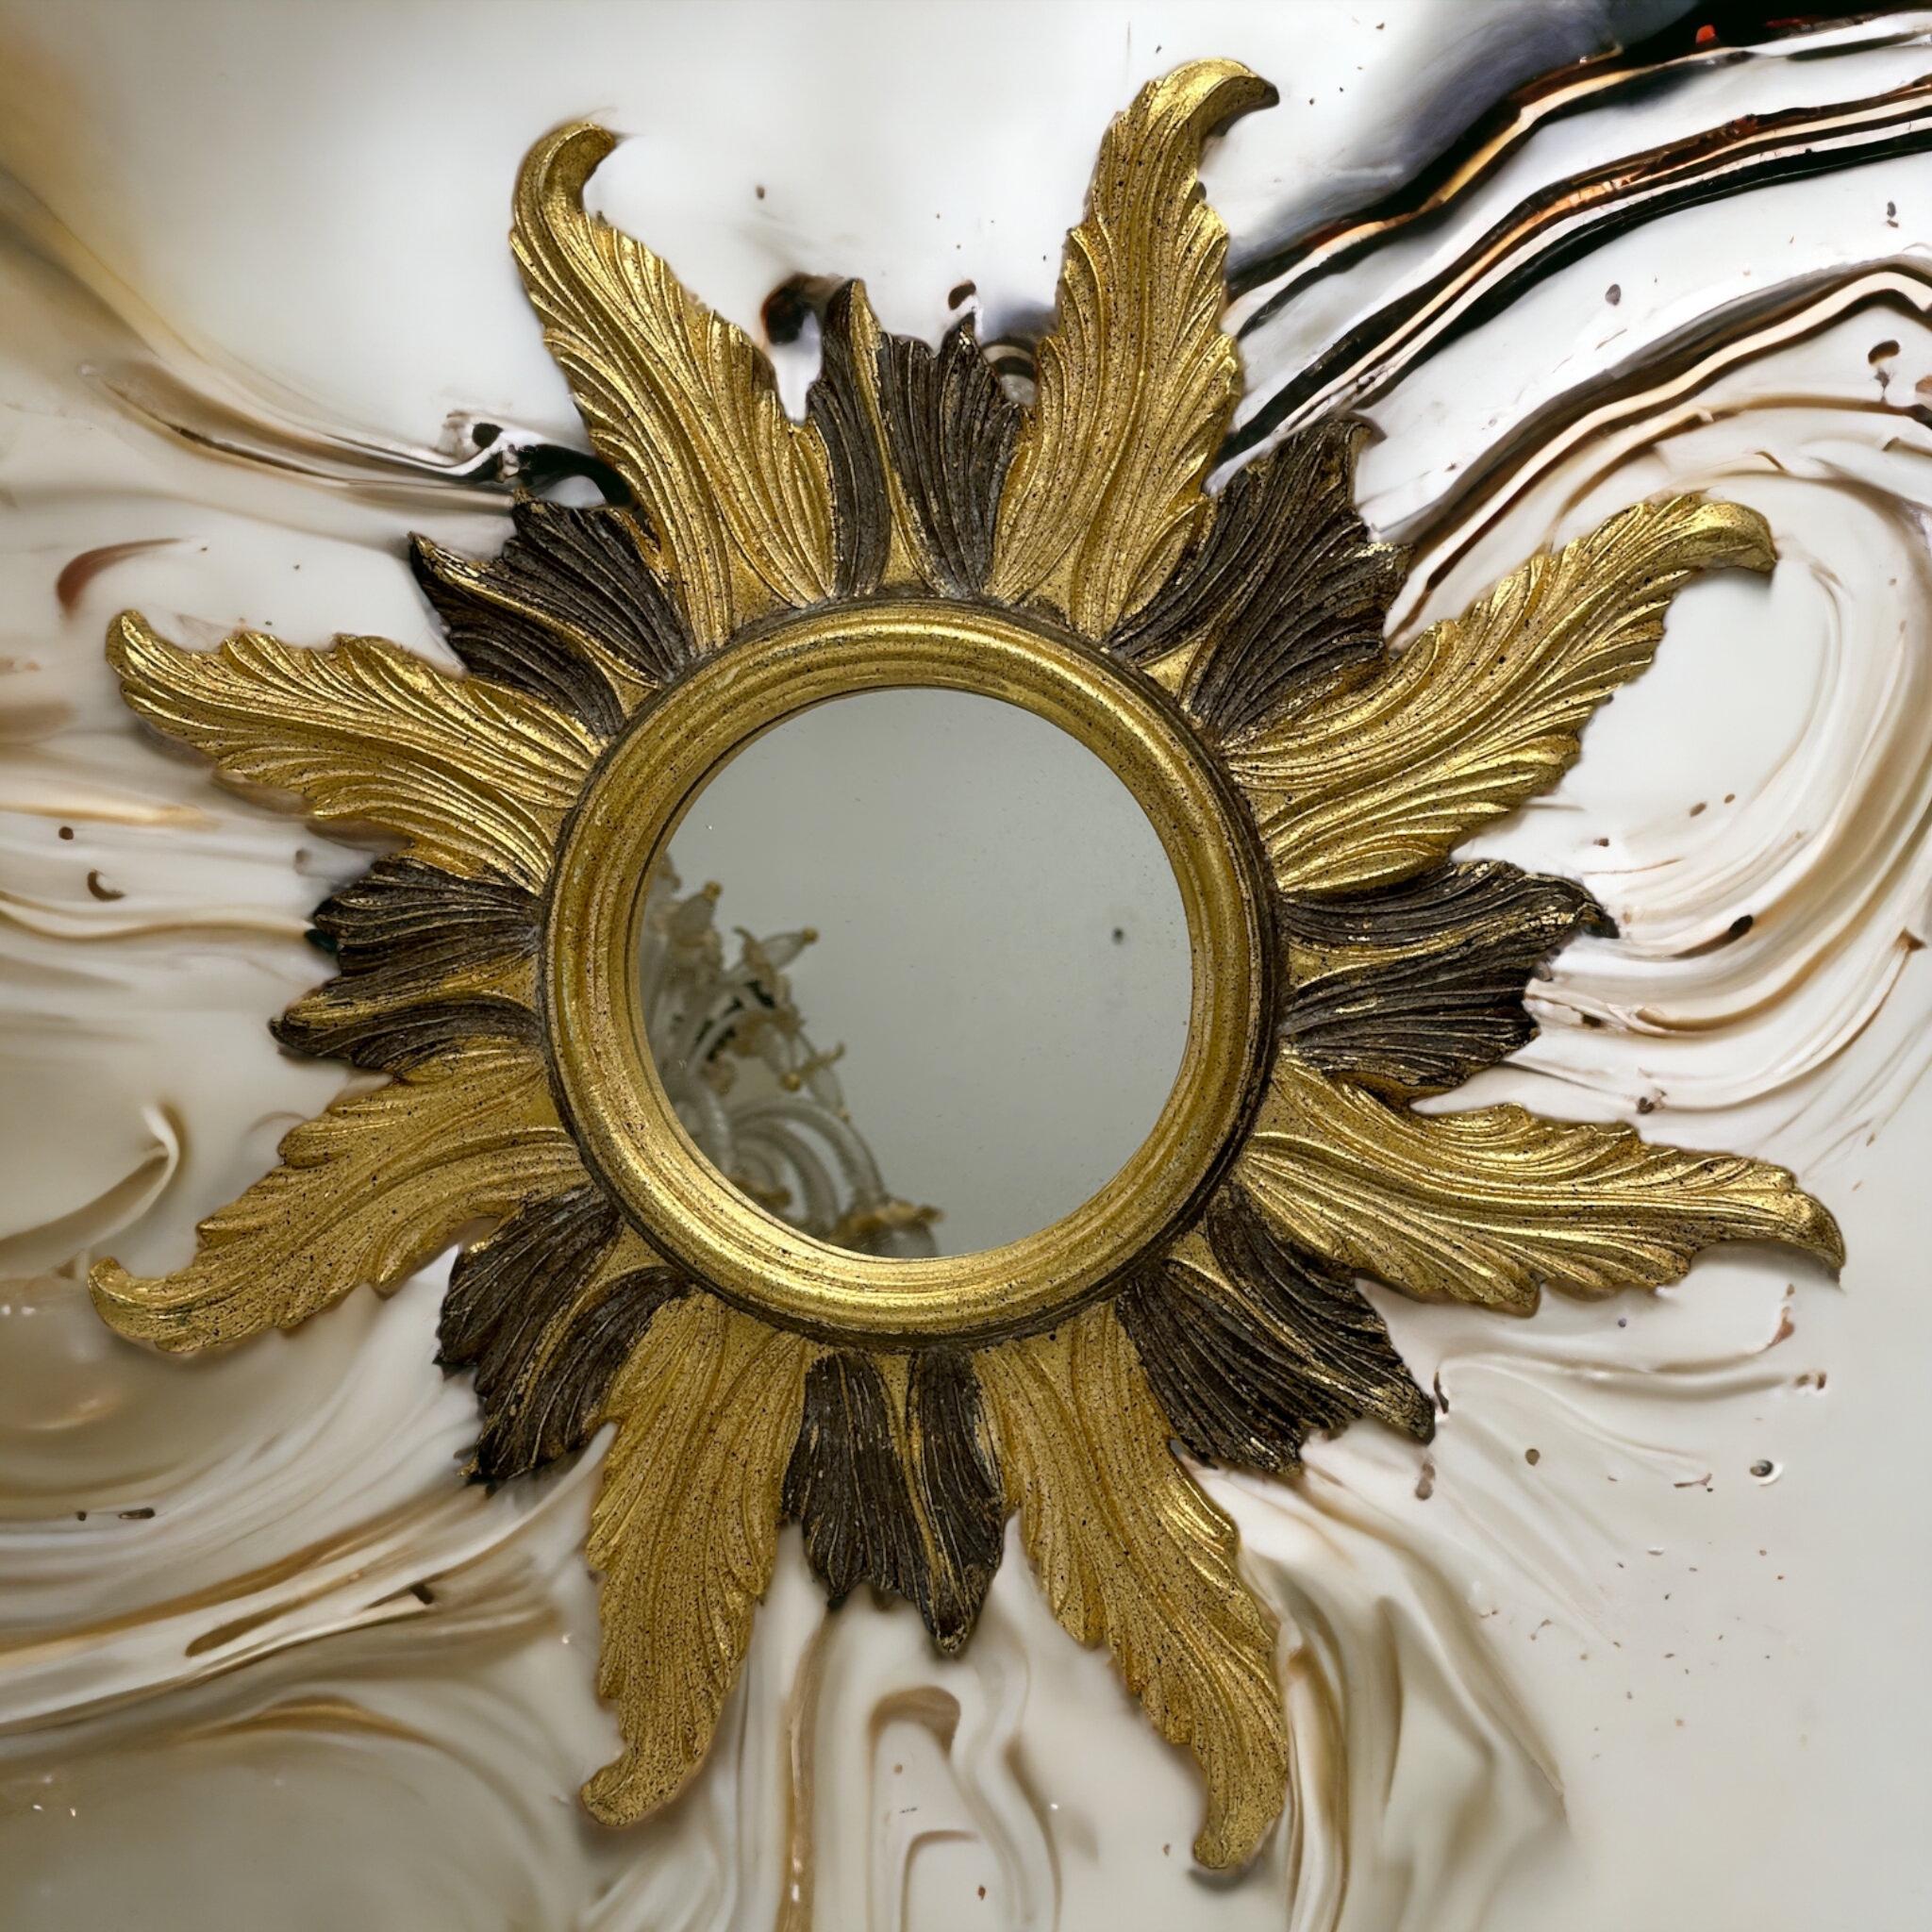 A beautiful starburst sunburst mirror. Made of gilded composition and wood. It measures approximate 22.38